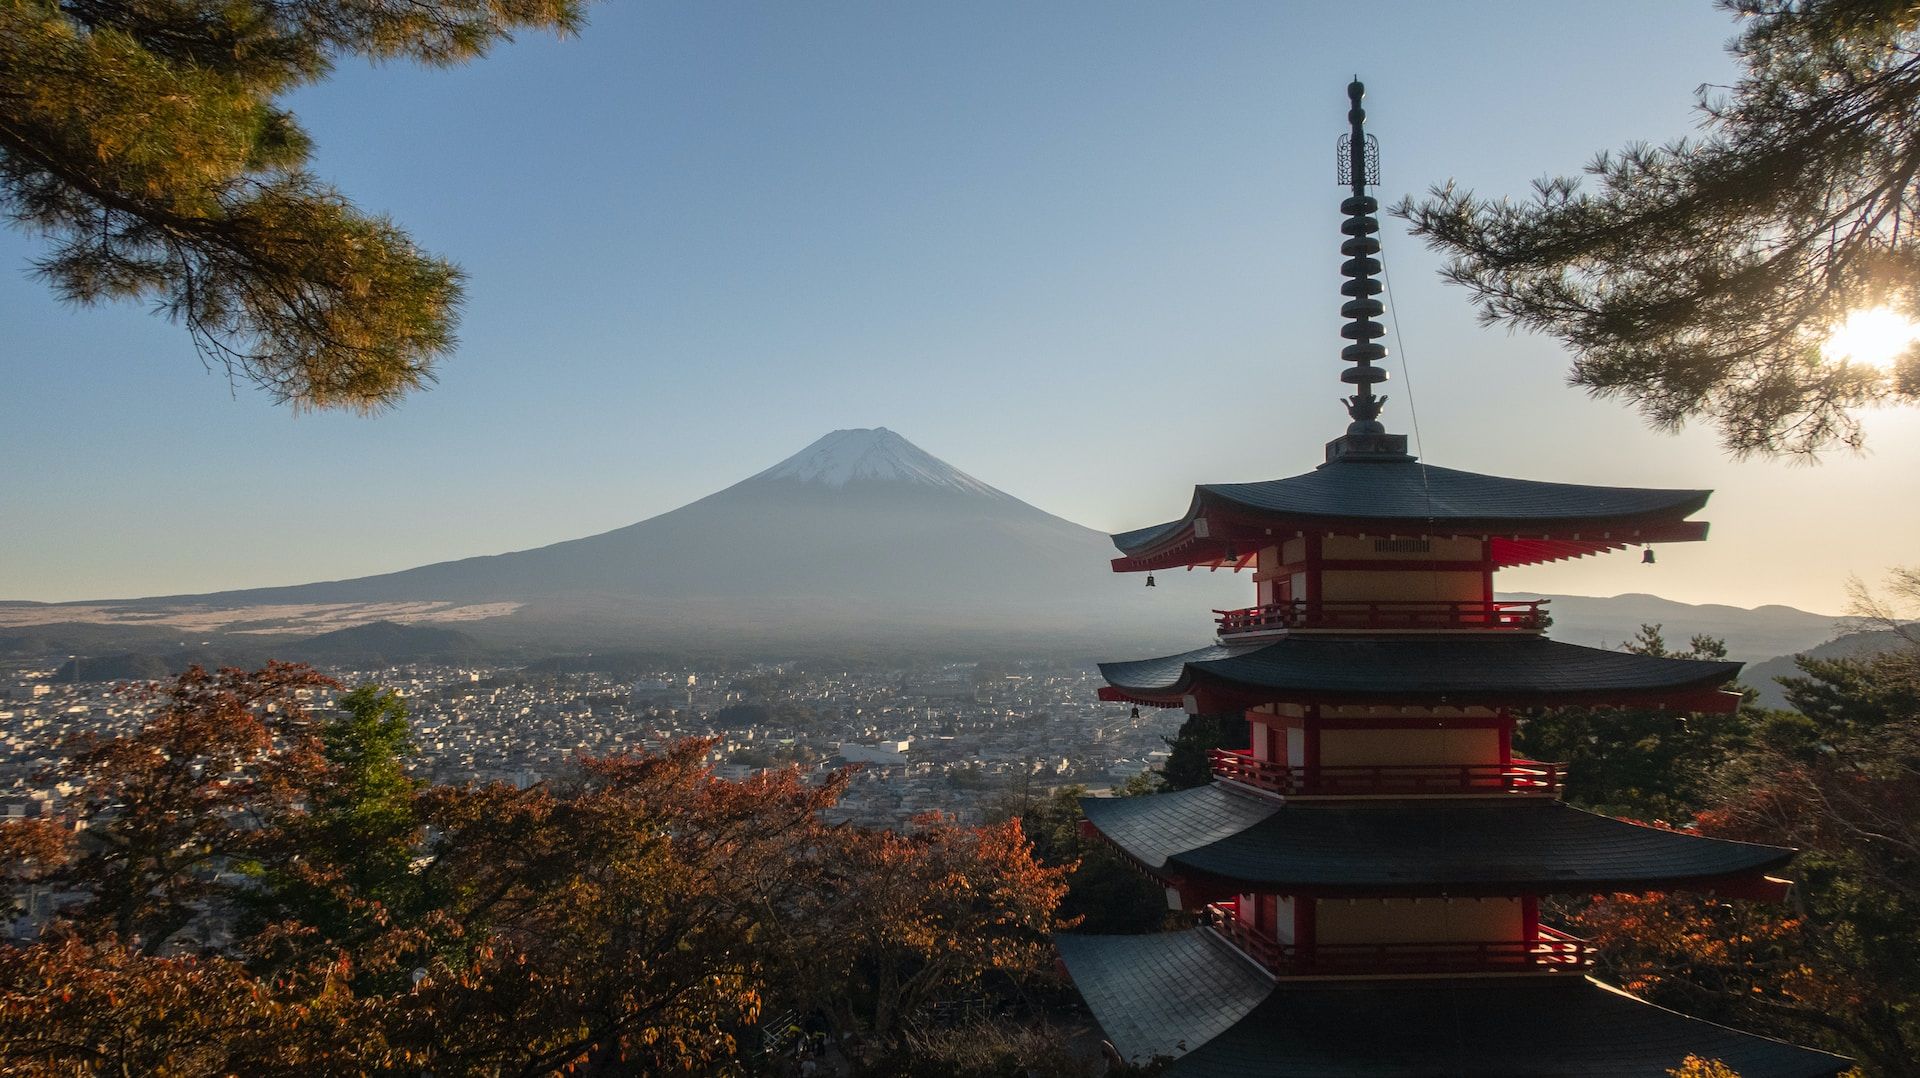 Arakura, Japan, with pagoda and Mount Fuji, surrounded by fall colors